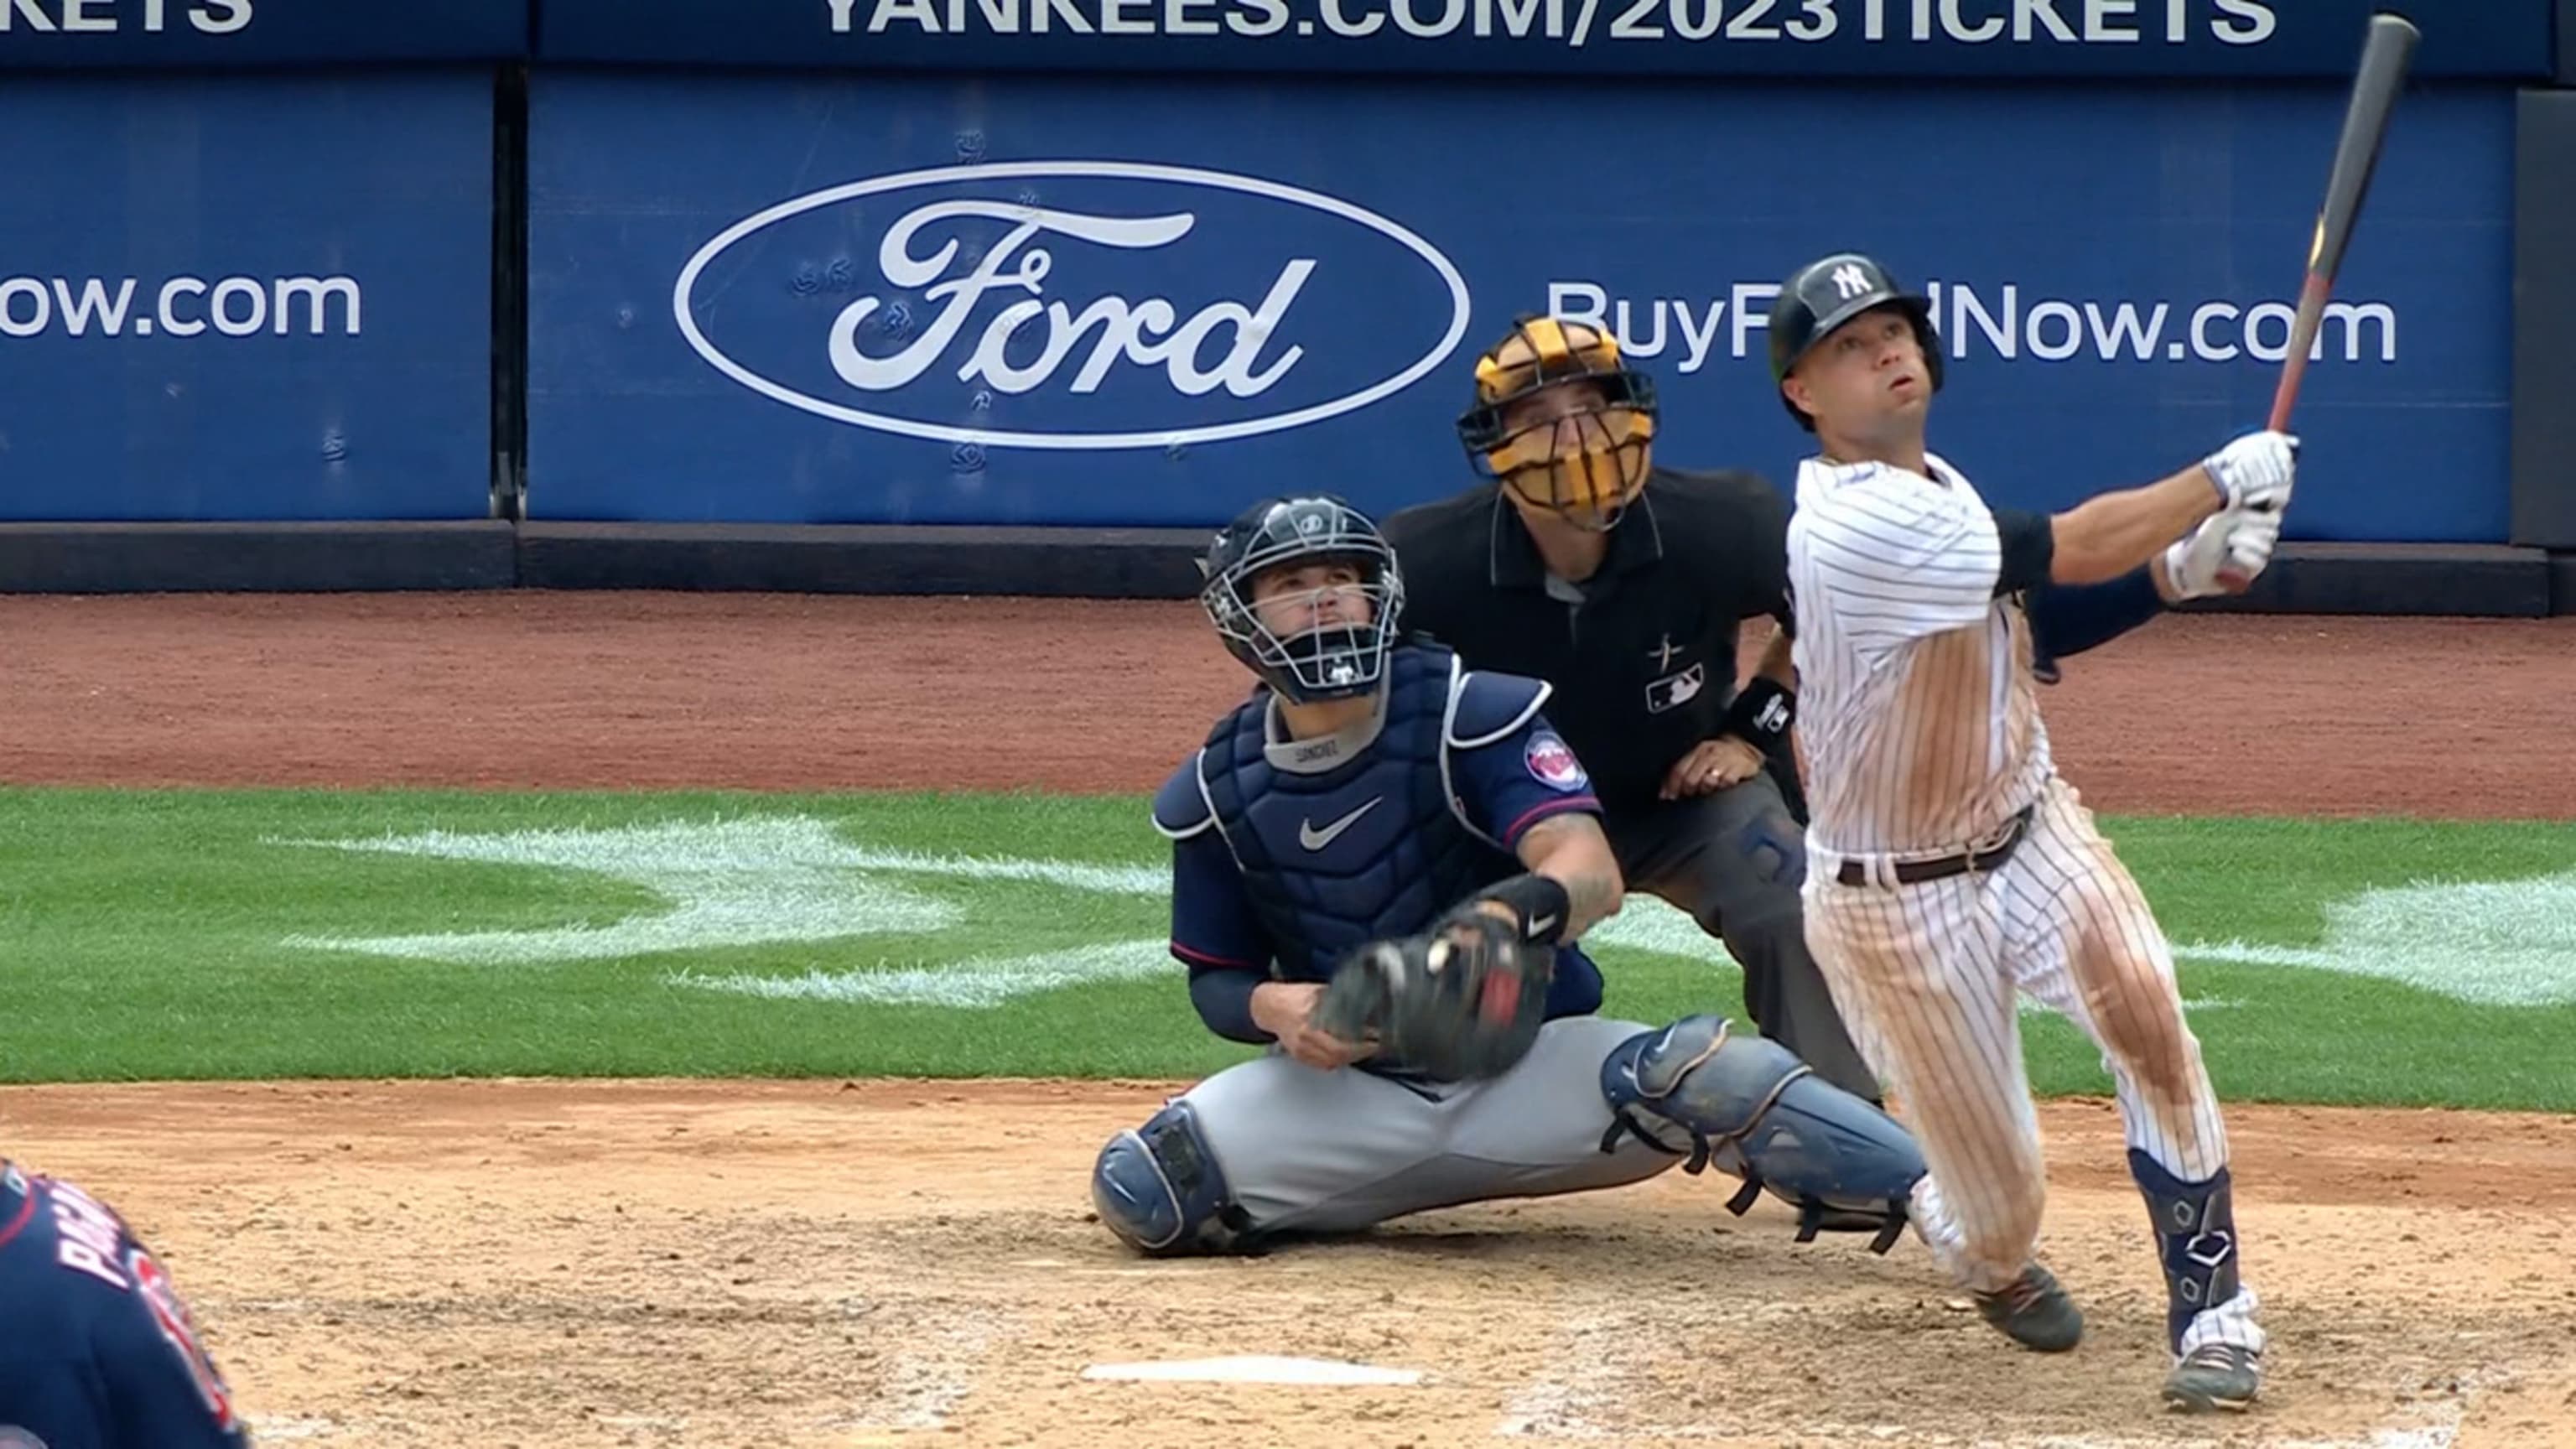 Aaron Judge Hits 54th Home Run, Staying Ahead of Roger Maris - The